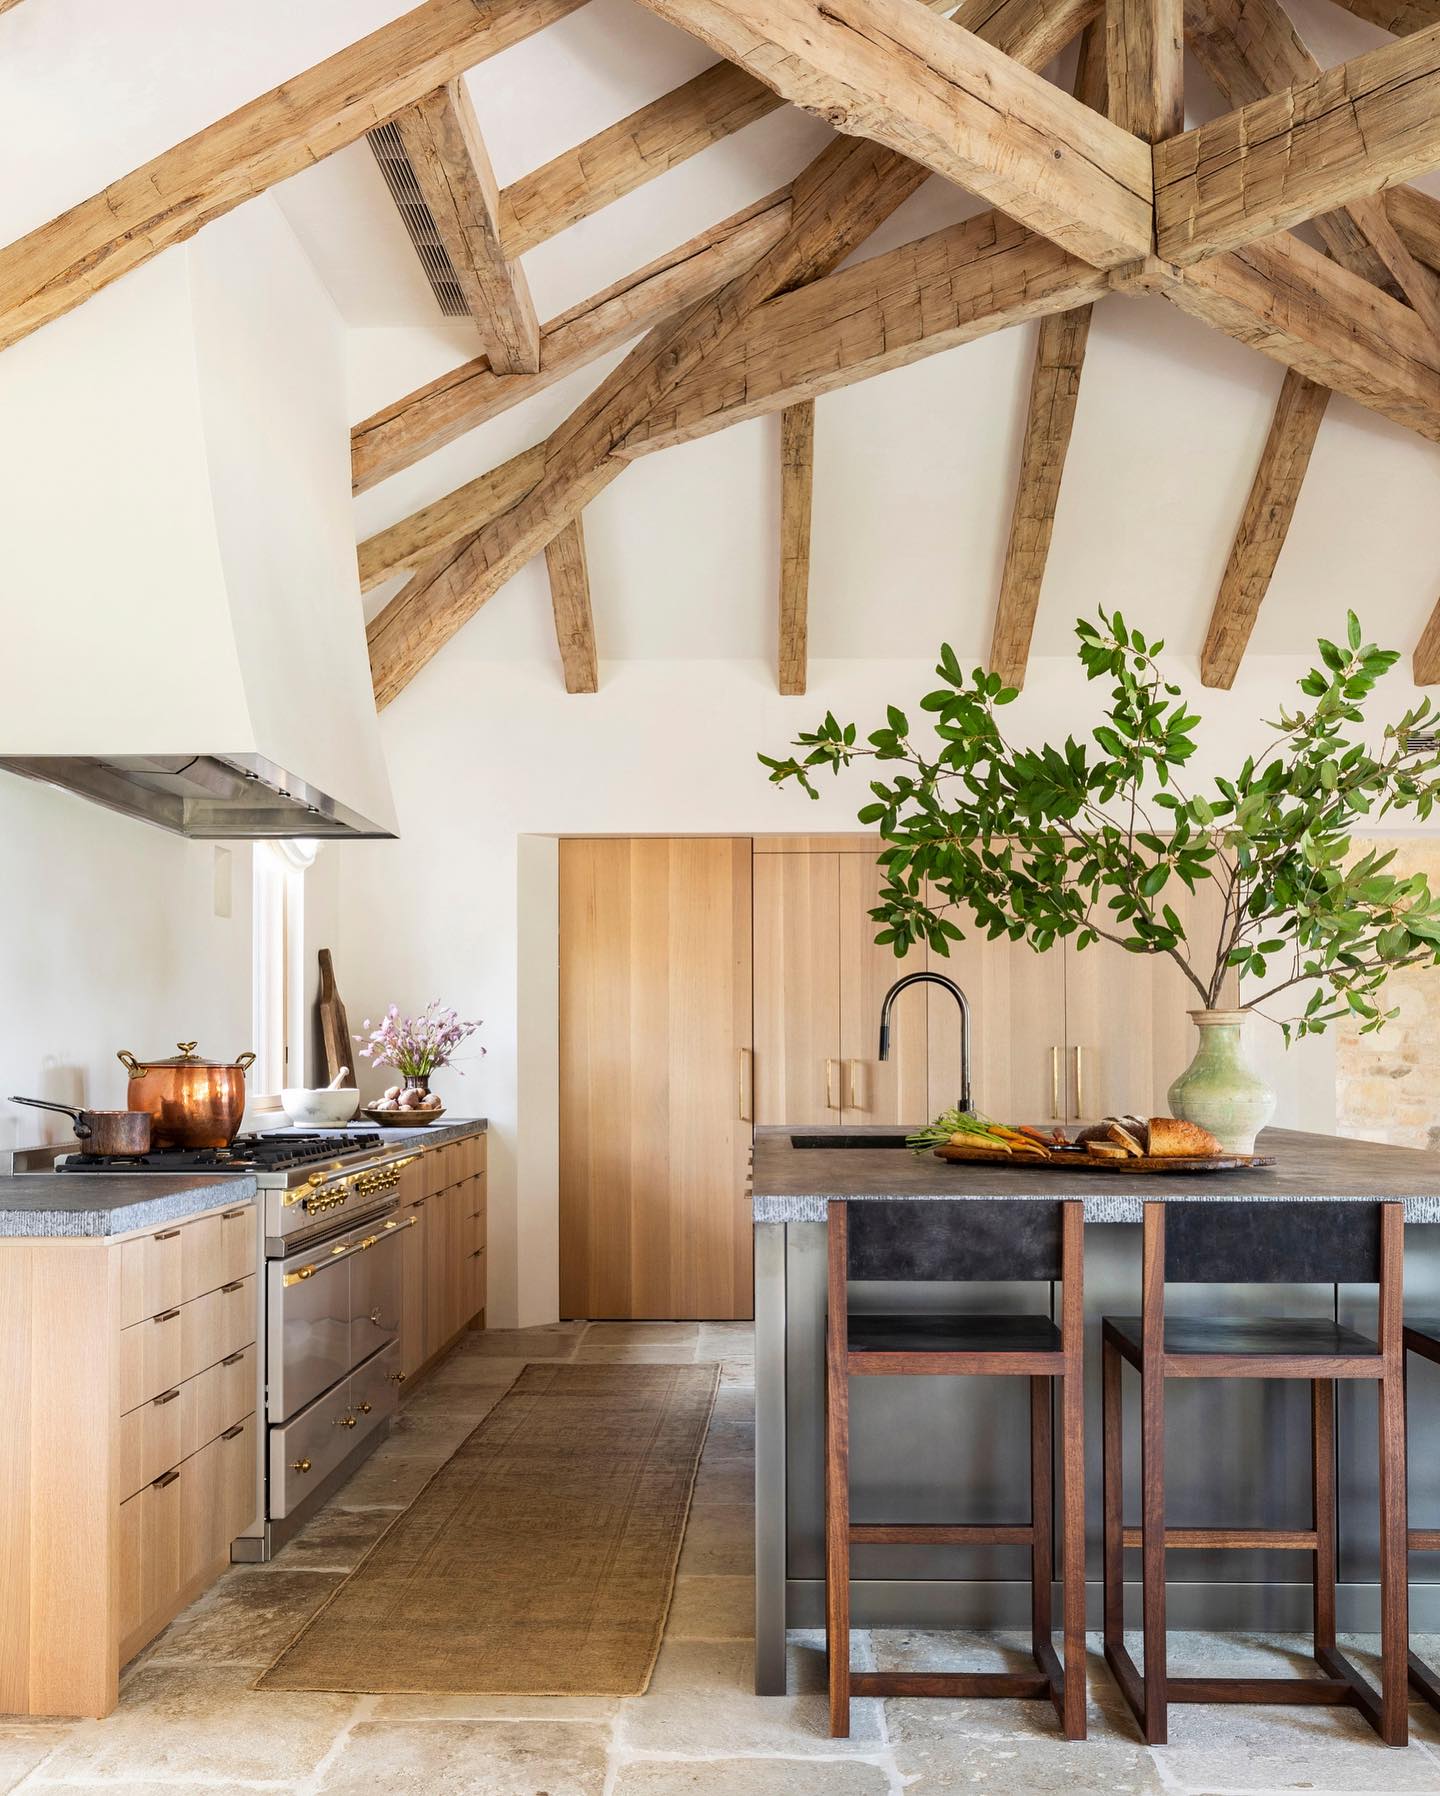 Magnificent architecture and ceiling beams in a bespoke kitchen with design by Marie Flanigan Interiors.